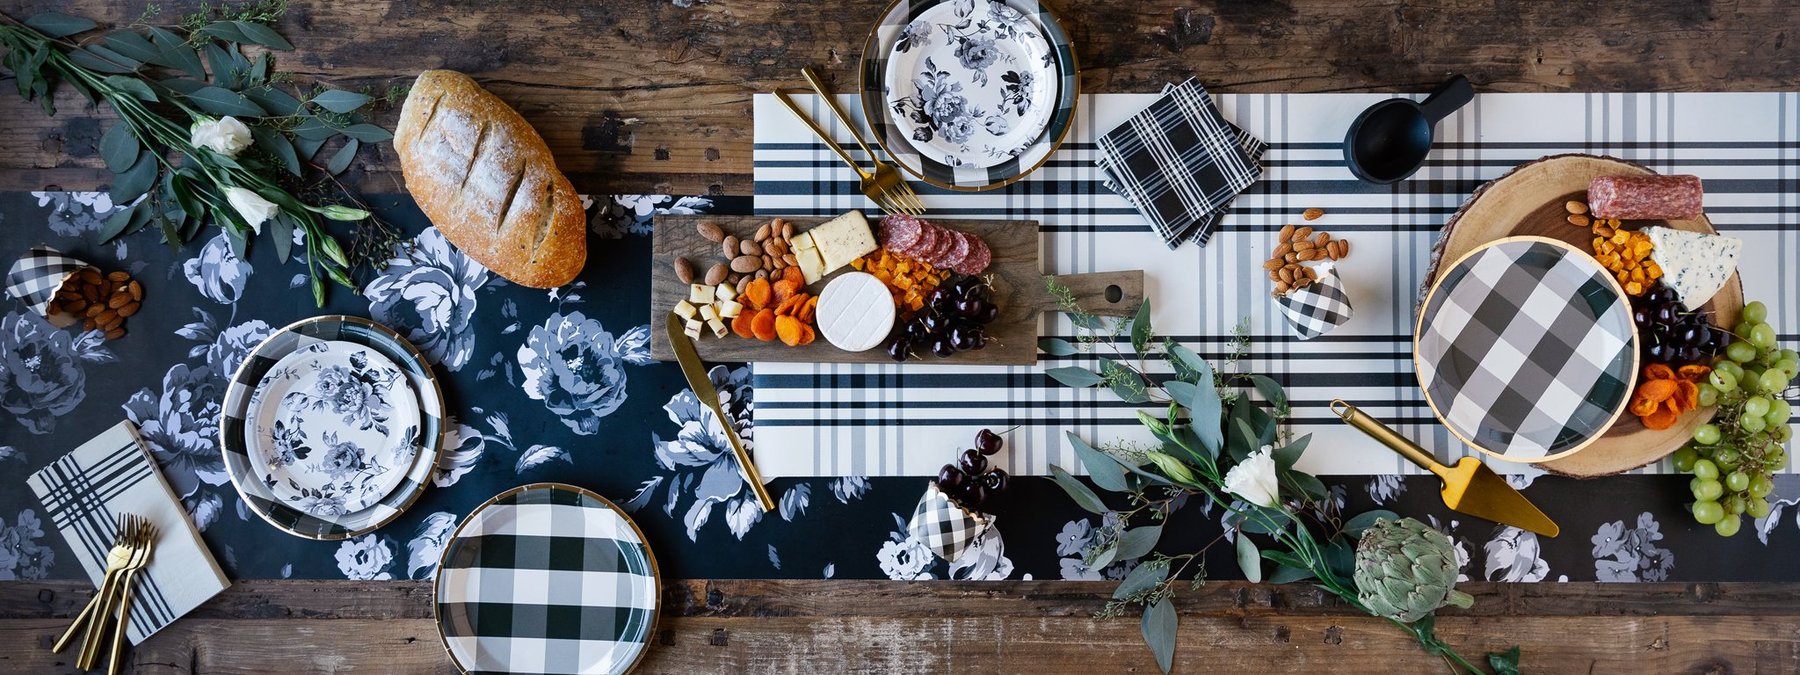 Tableware with black and white pattern